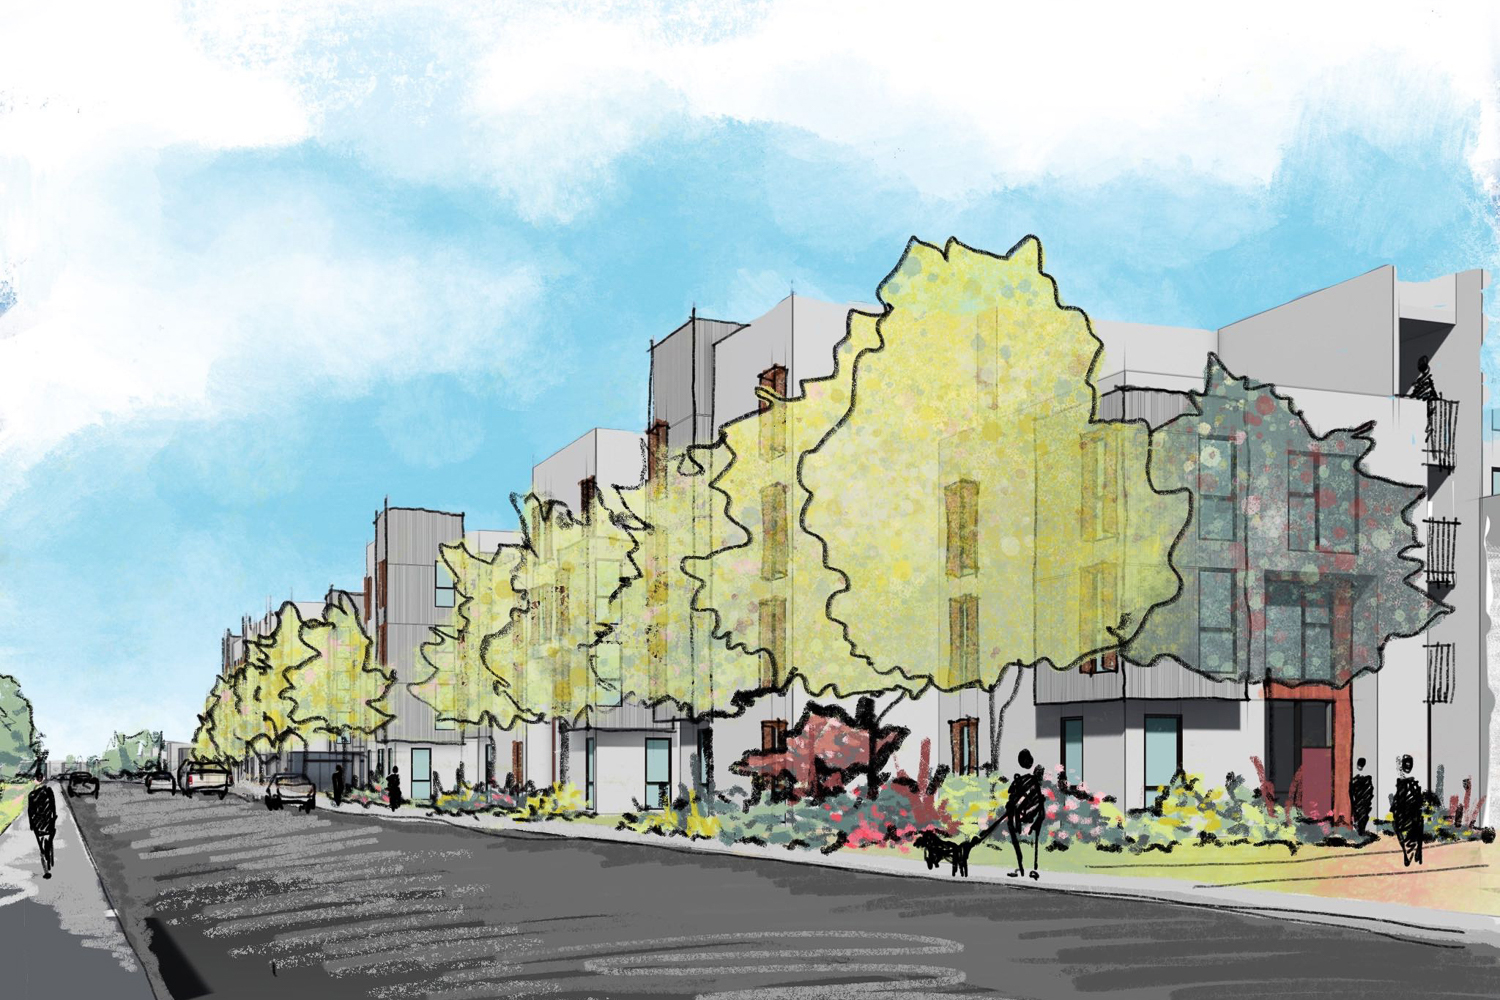 965 Weeks Street east view, illustration by David Baker Architects